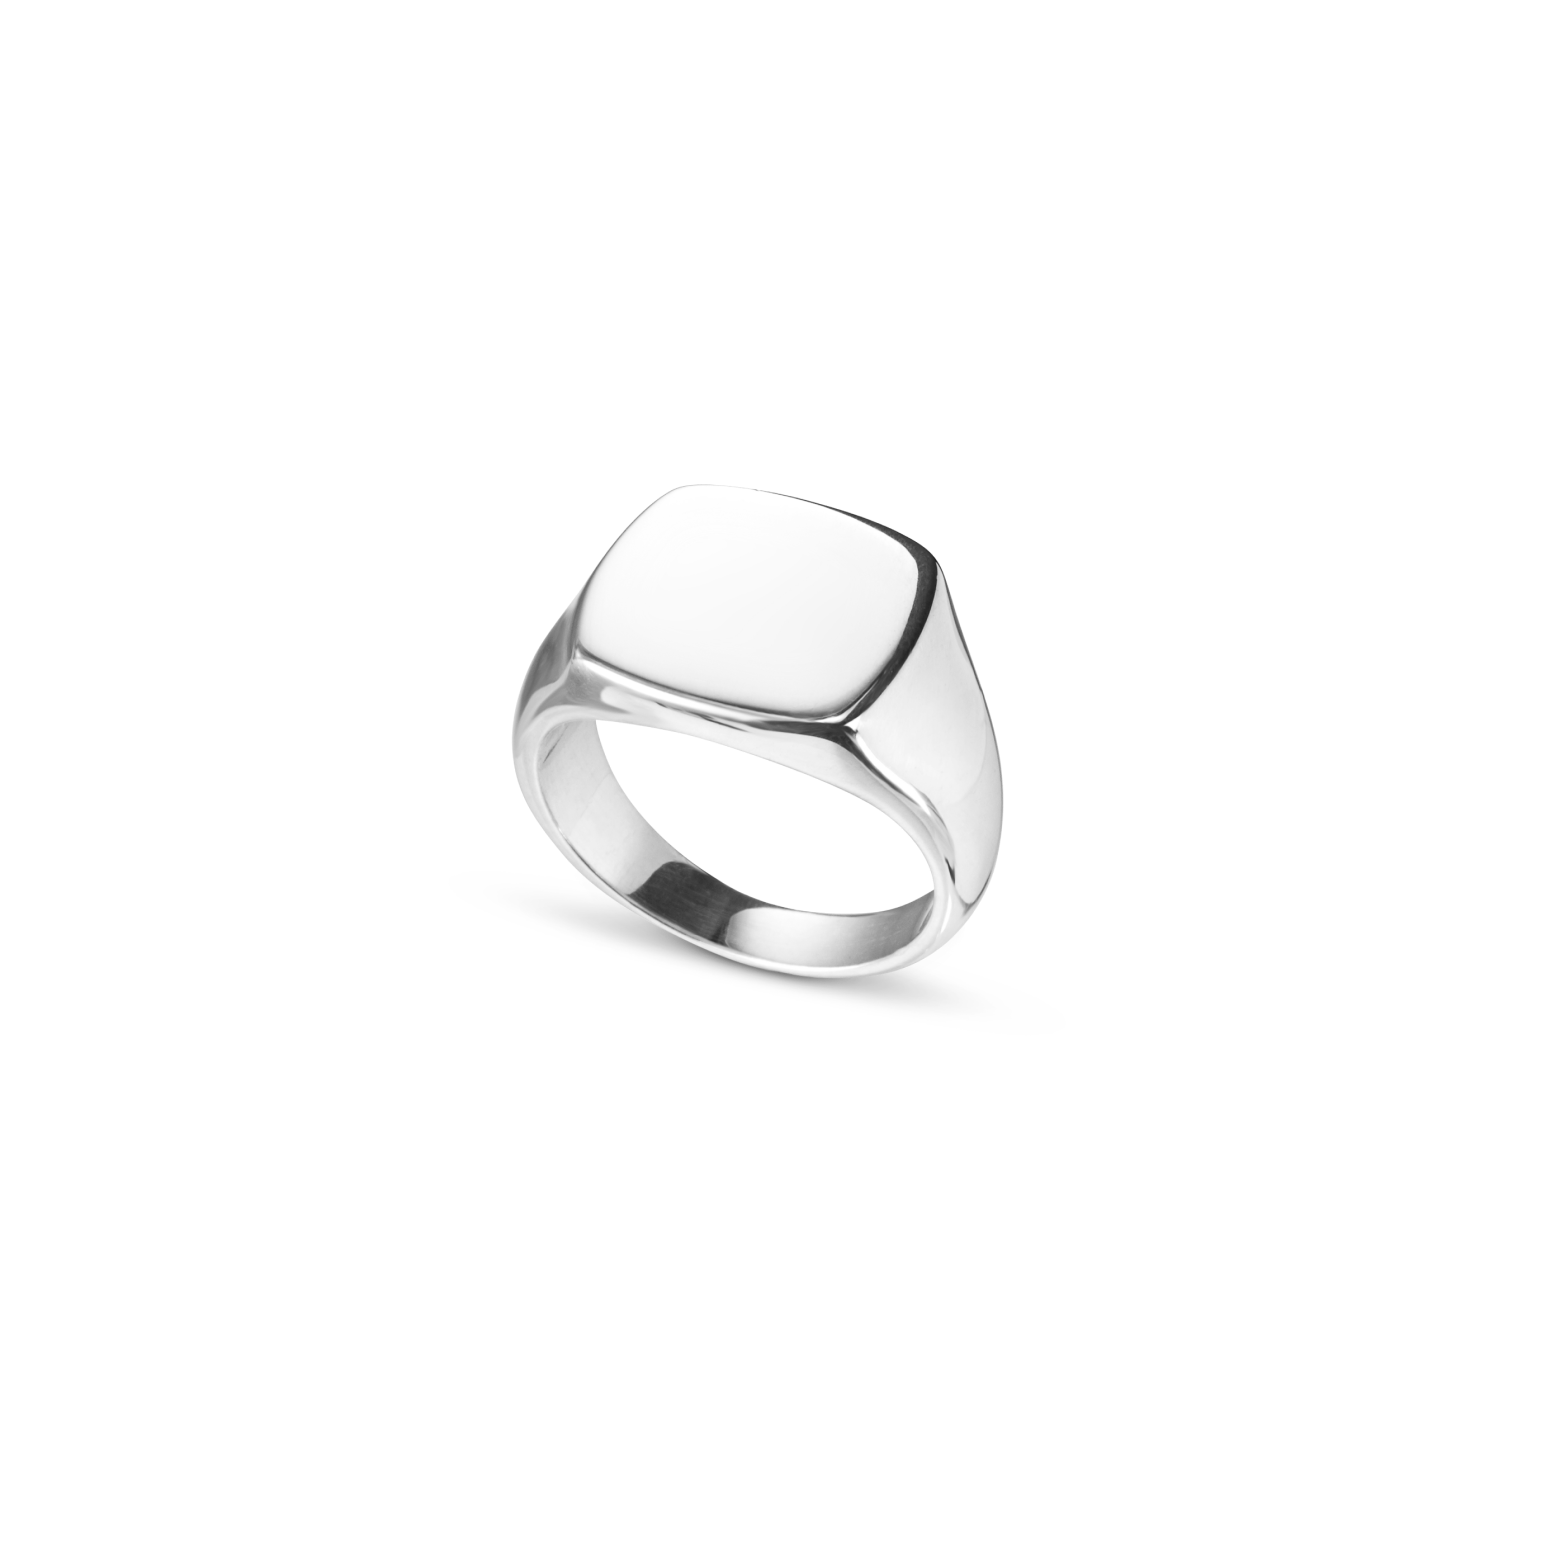 The Cushion Signet Ring